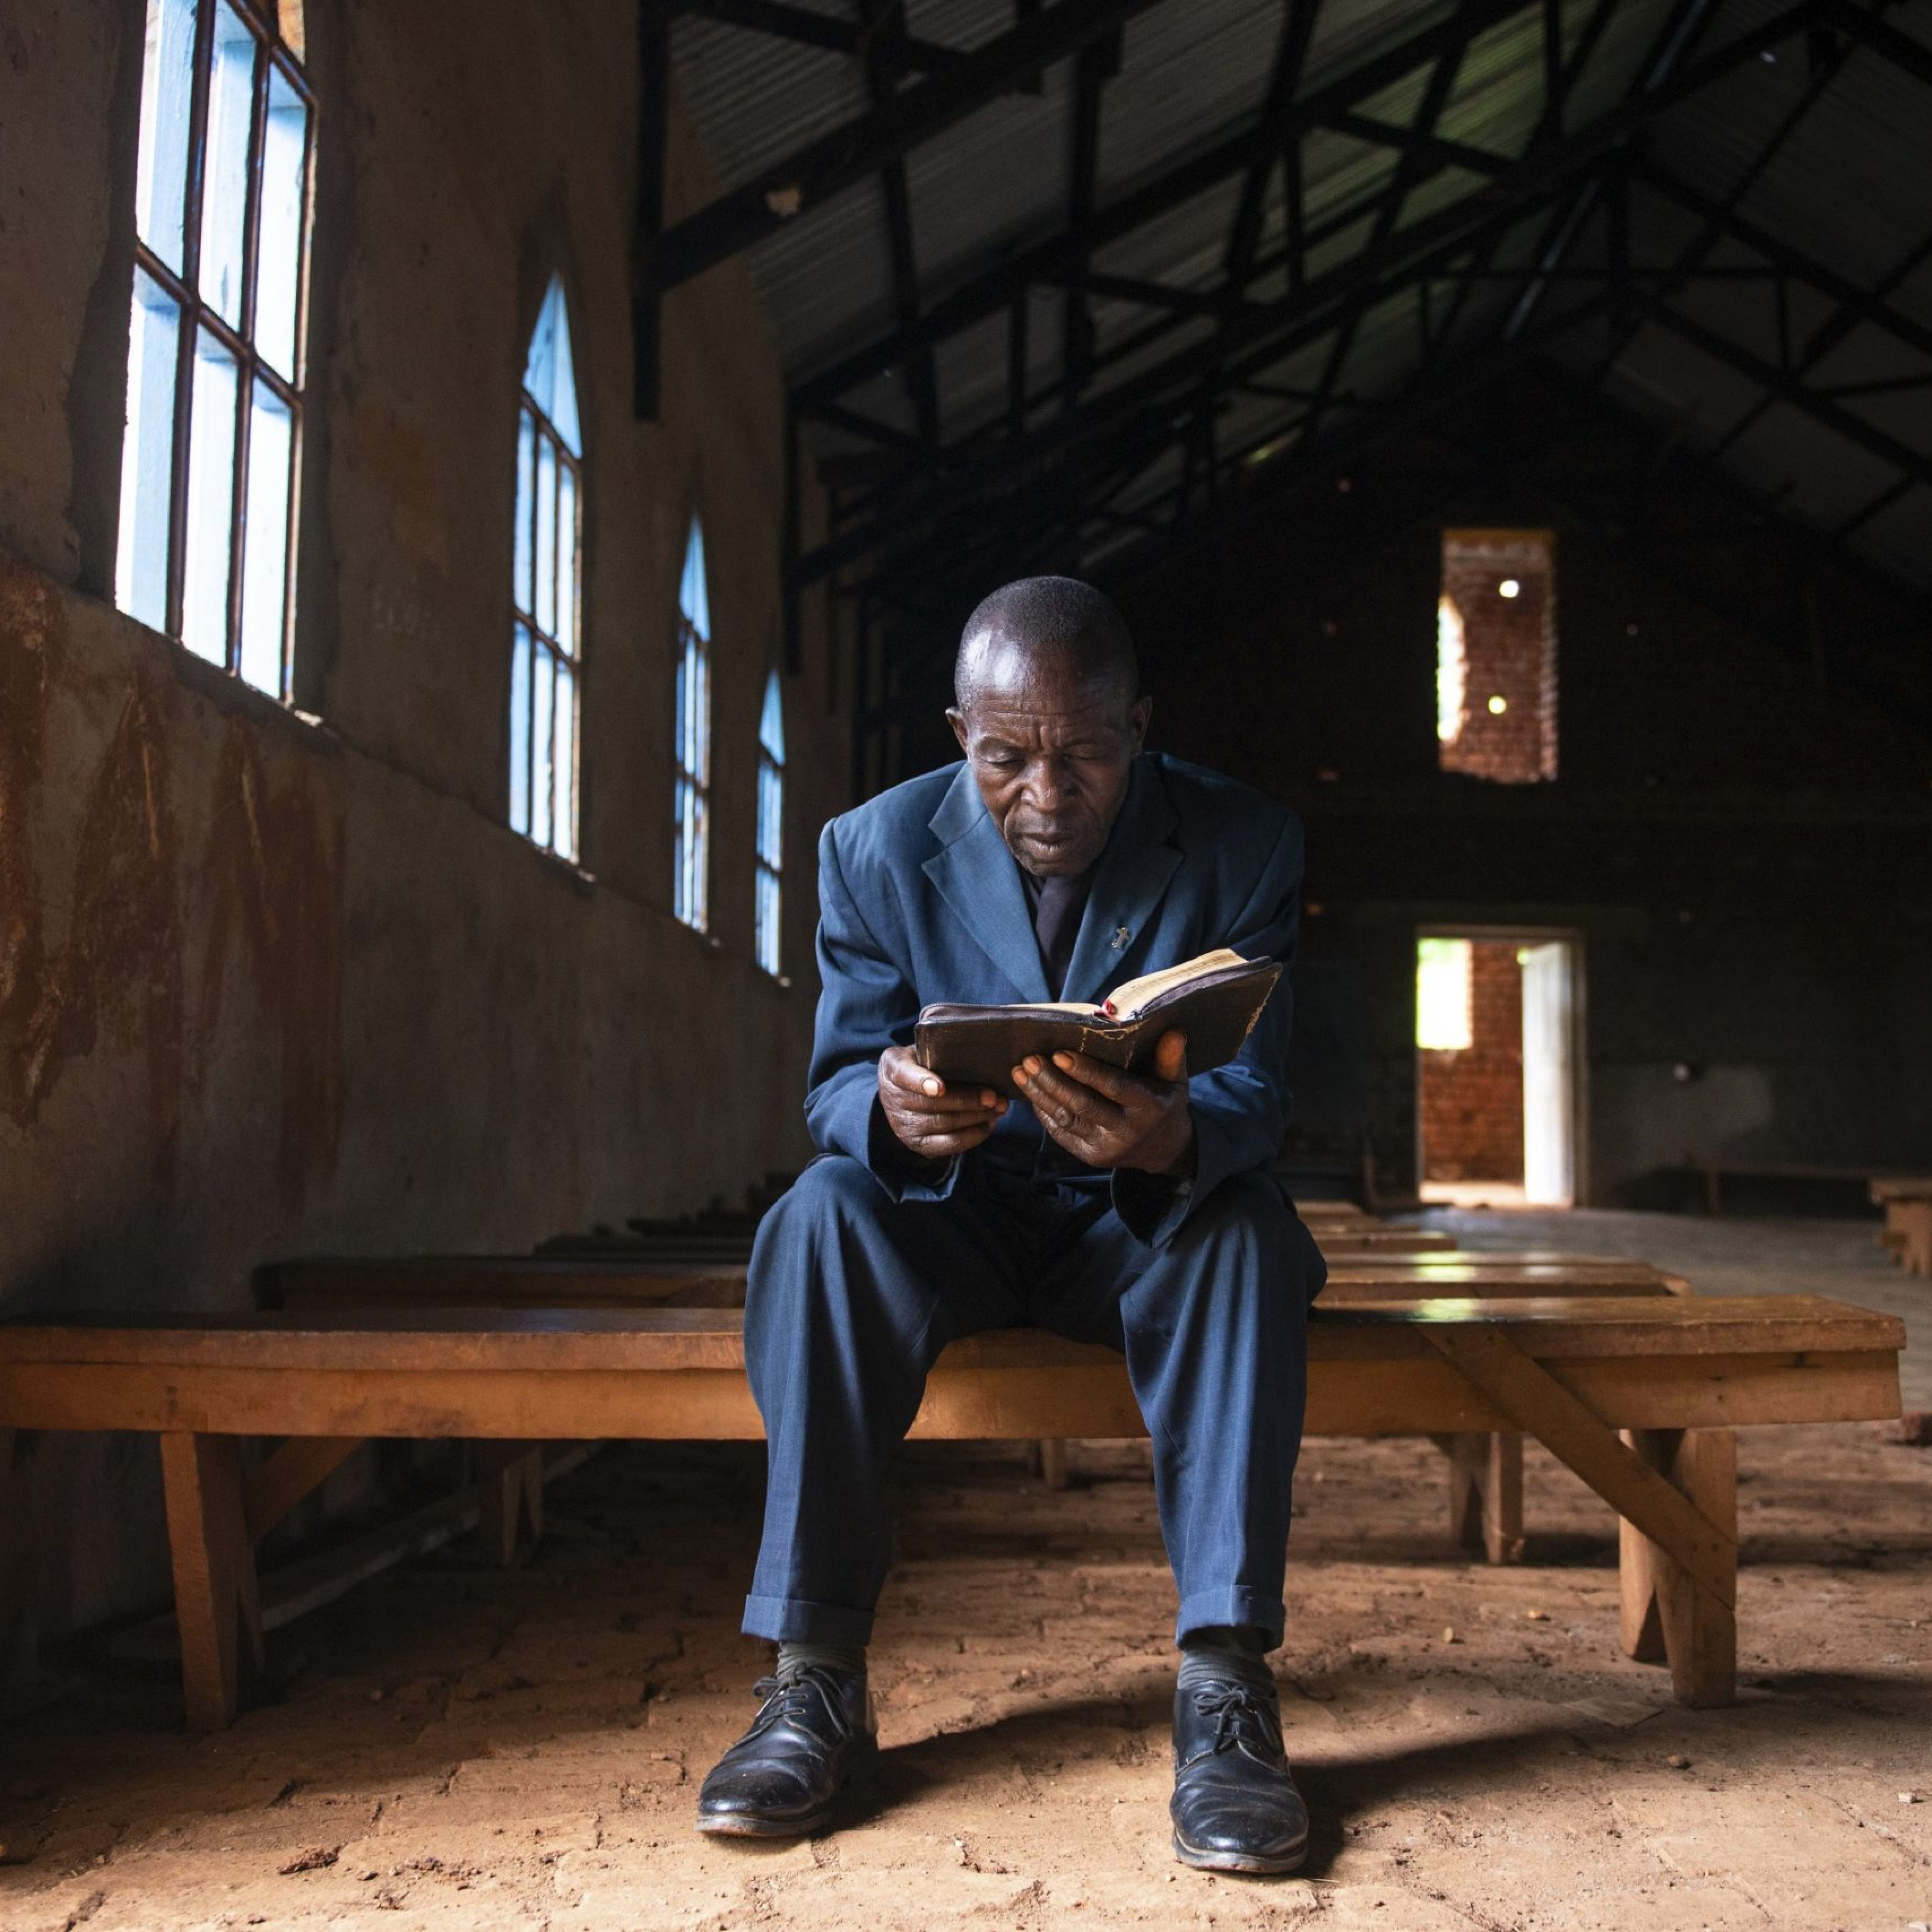 Pastor Mutsuva Vyahera Tadel, 65, reads from the bible in the church in Kiwata, Democratic Republic of Congo, on 12 December 2021. Tadei has been the pastor in charge of the CBCA parish in the village of KIWATA for eight years now, where Tearfund supports the food security agriculture and community empowerment project through the AVEC programme. He says, 'Before the project started, we were farming just to eat, the crops were not enough to allow us to sell some and consume some. But since the project started, we are able to farm better, the crops are enough to consume and market.' Tearfund Canada continues to support several training and outreach programmes, with the help of CBCA, in the Democratic Republic of Congo in order to assist vulnerable communities out of poverty.